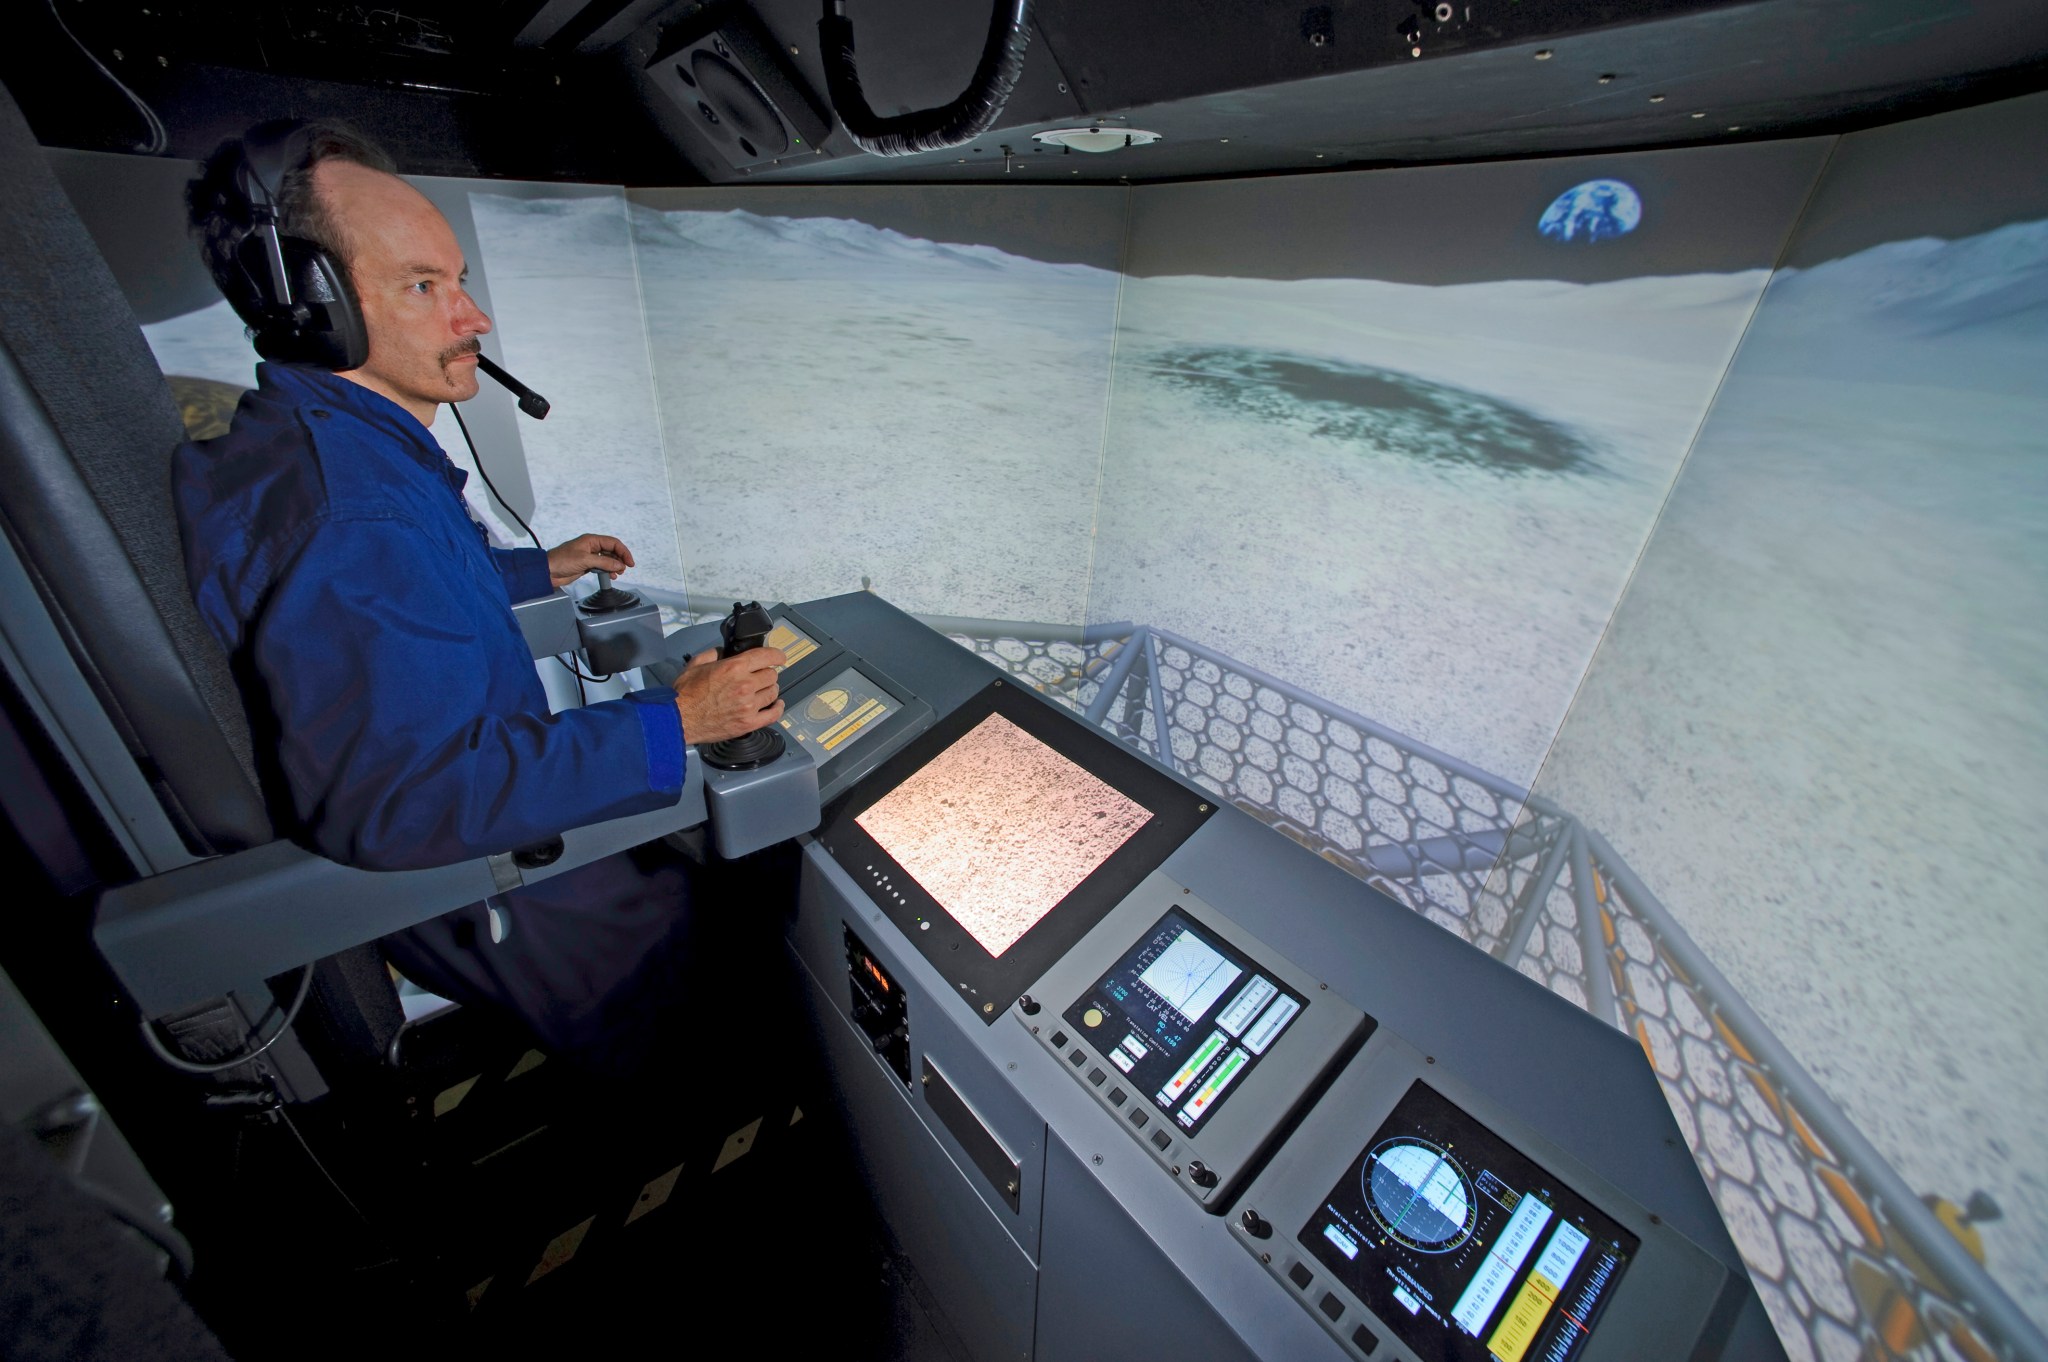 A pilot stands at the controls of the VMS and views the out-the-window displays of the lunar surface.